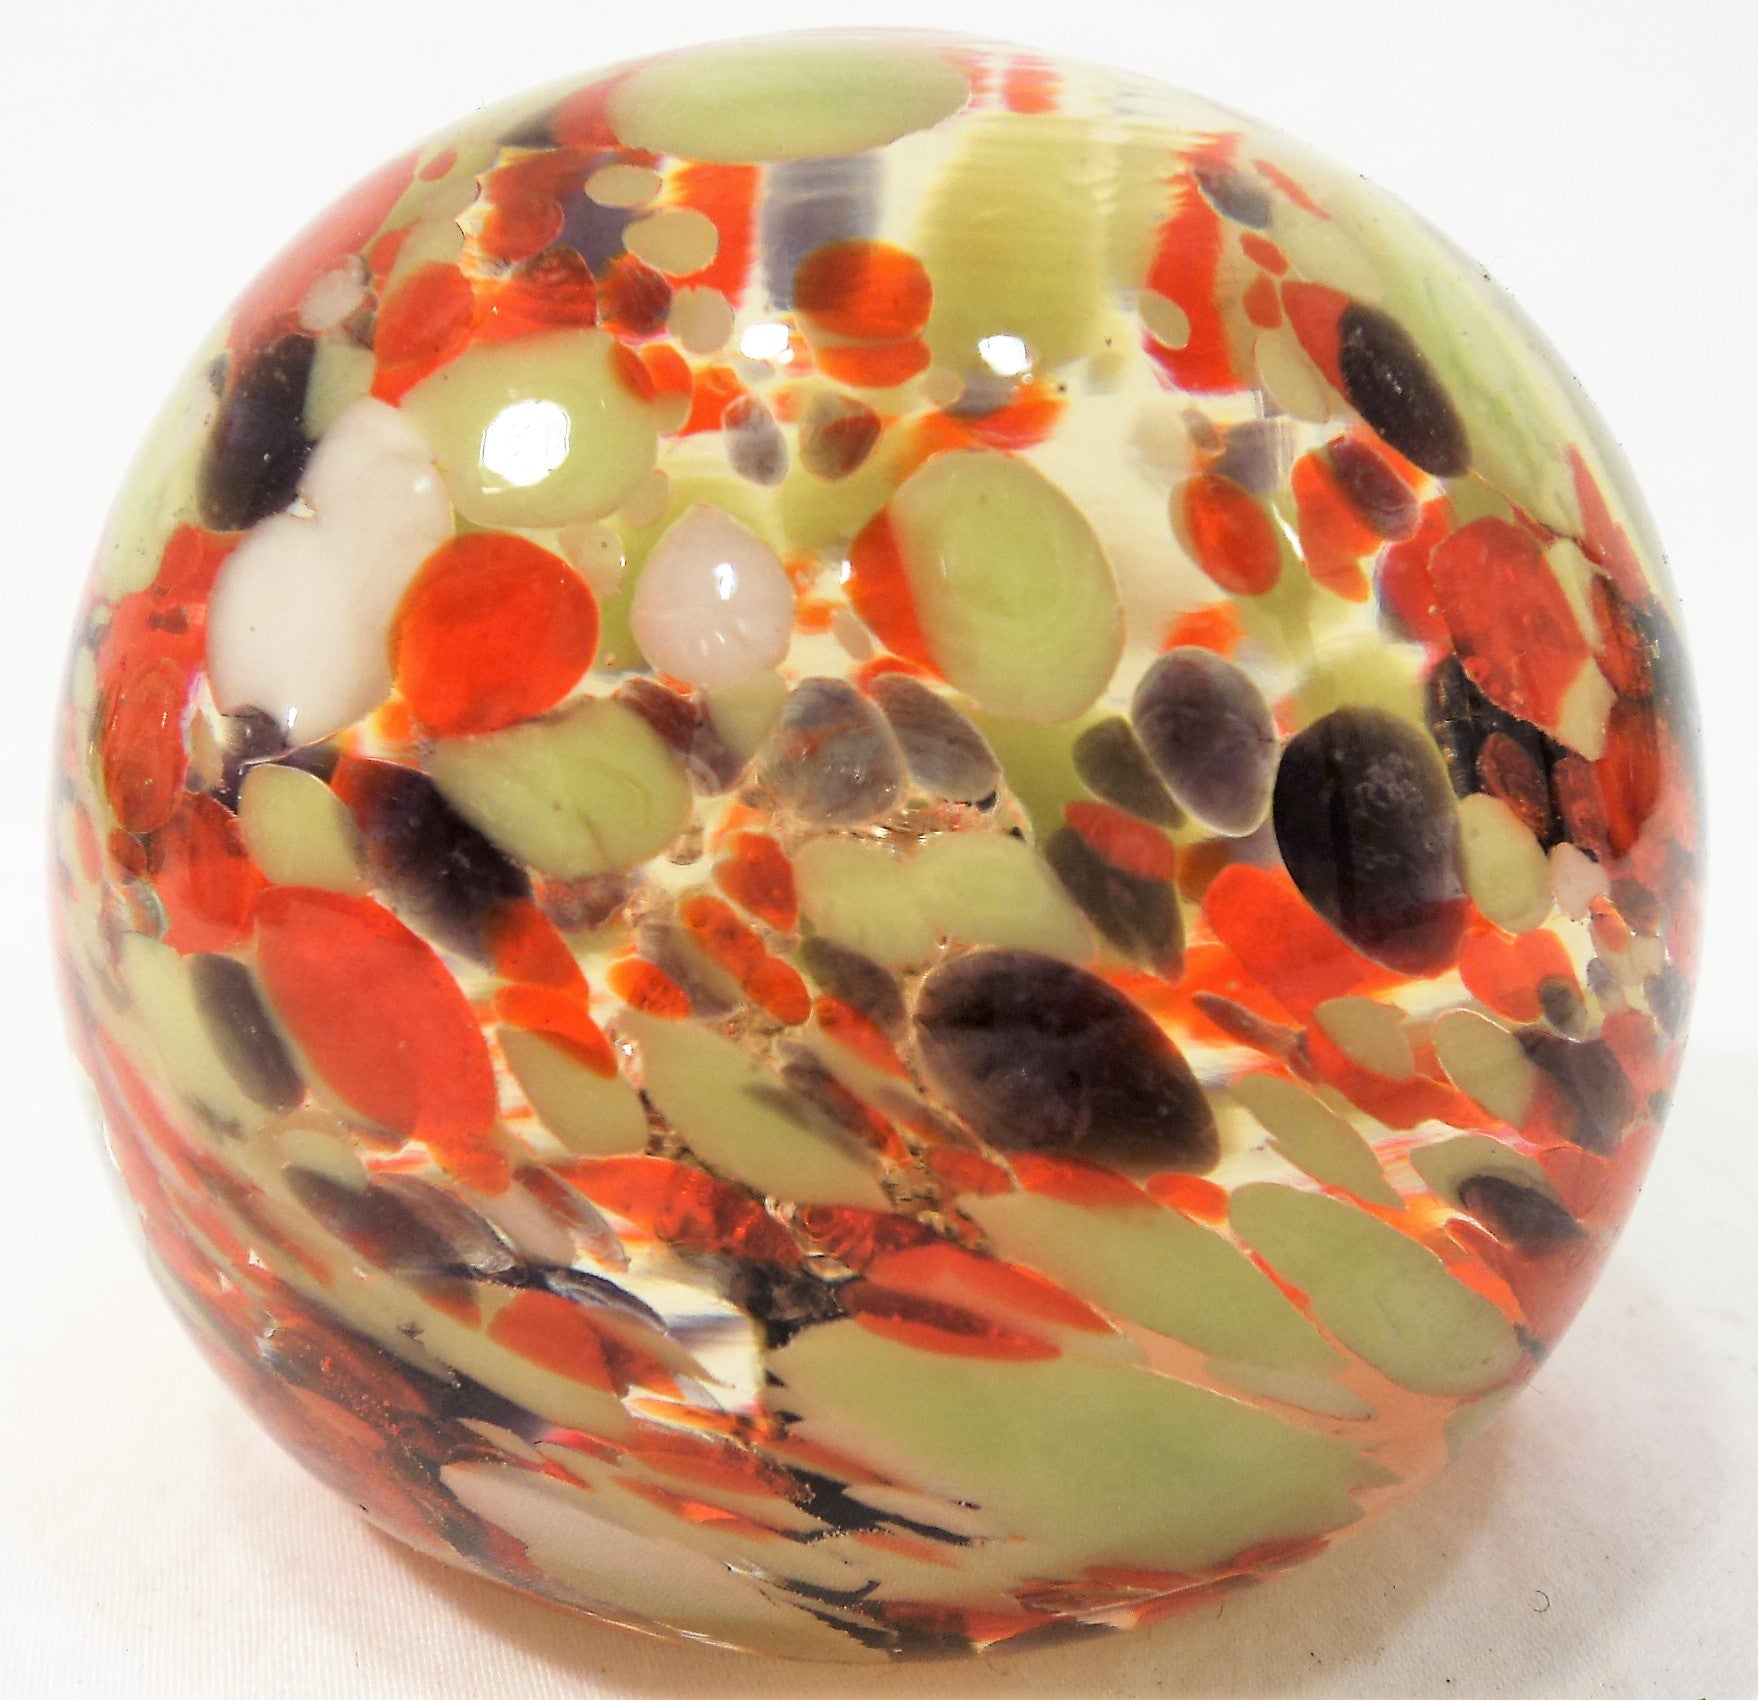 Control-Bubble Vintage Art Glass Paperweight